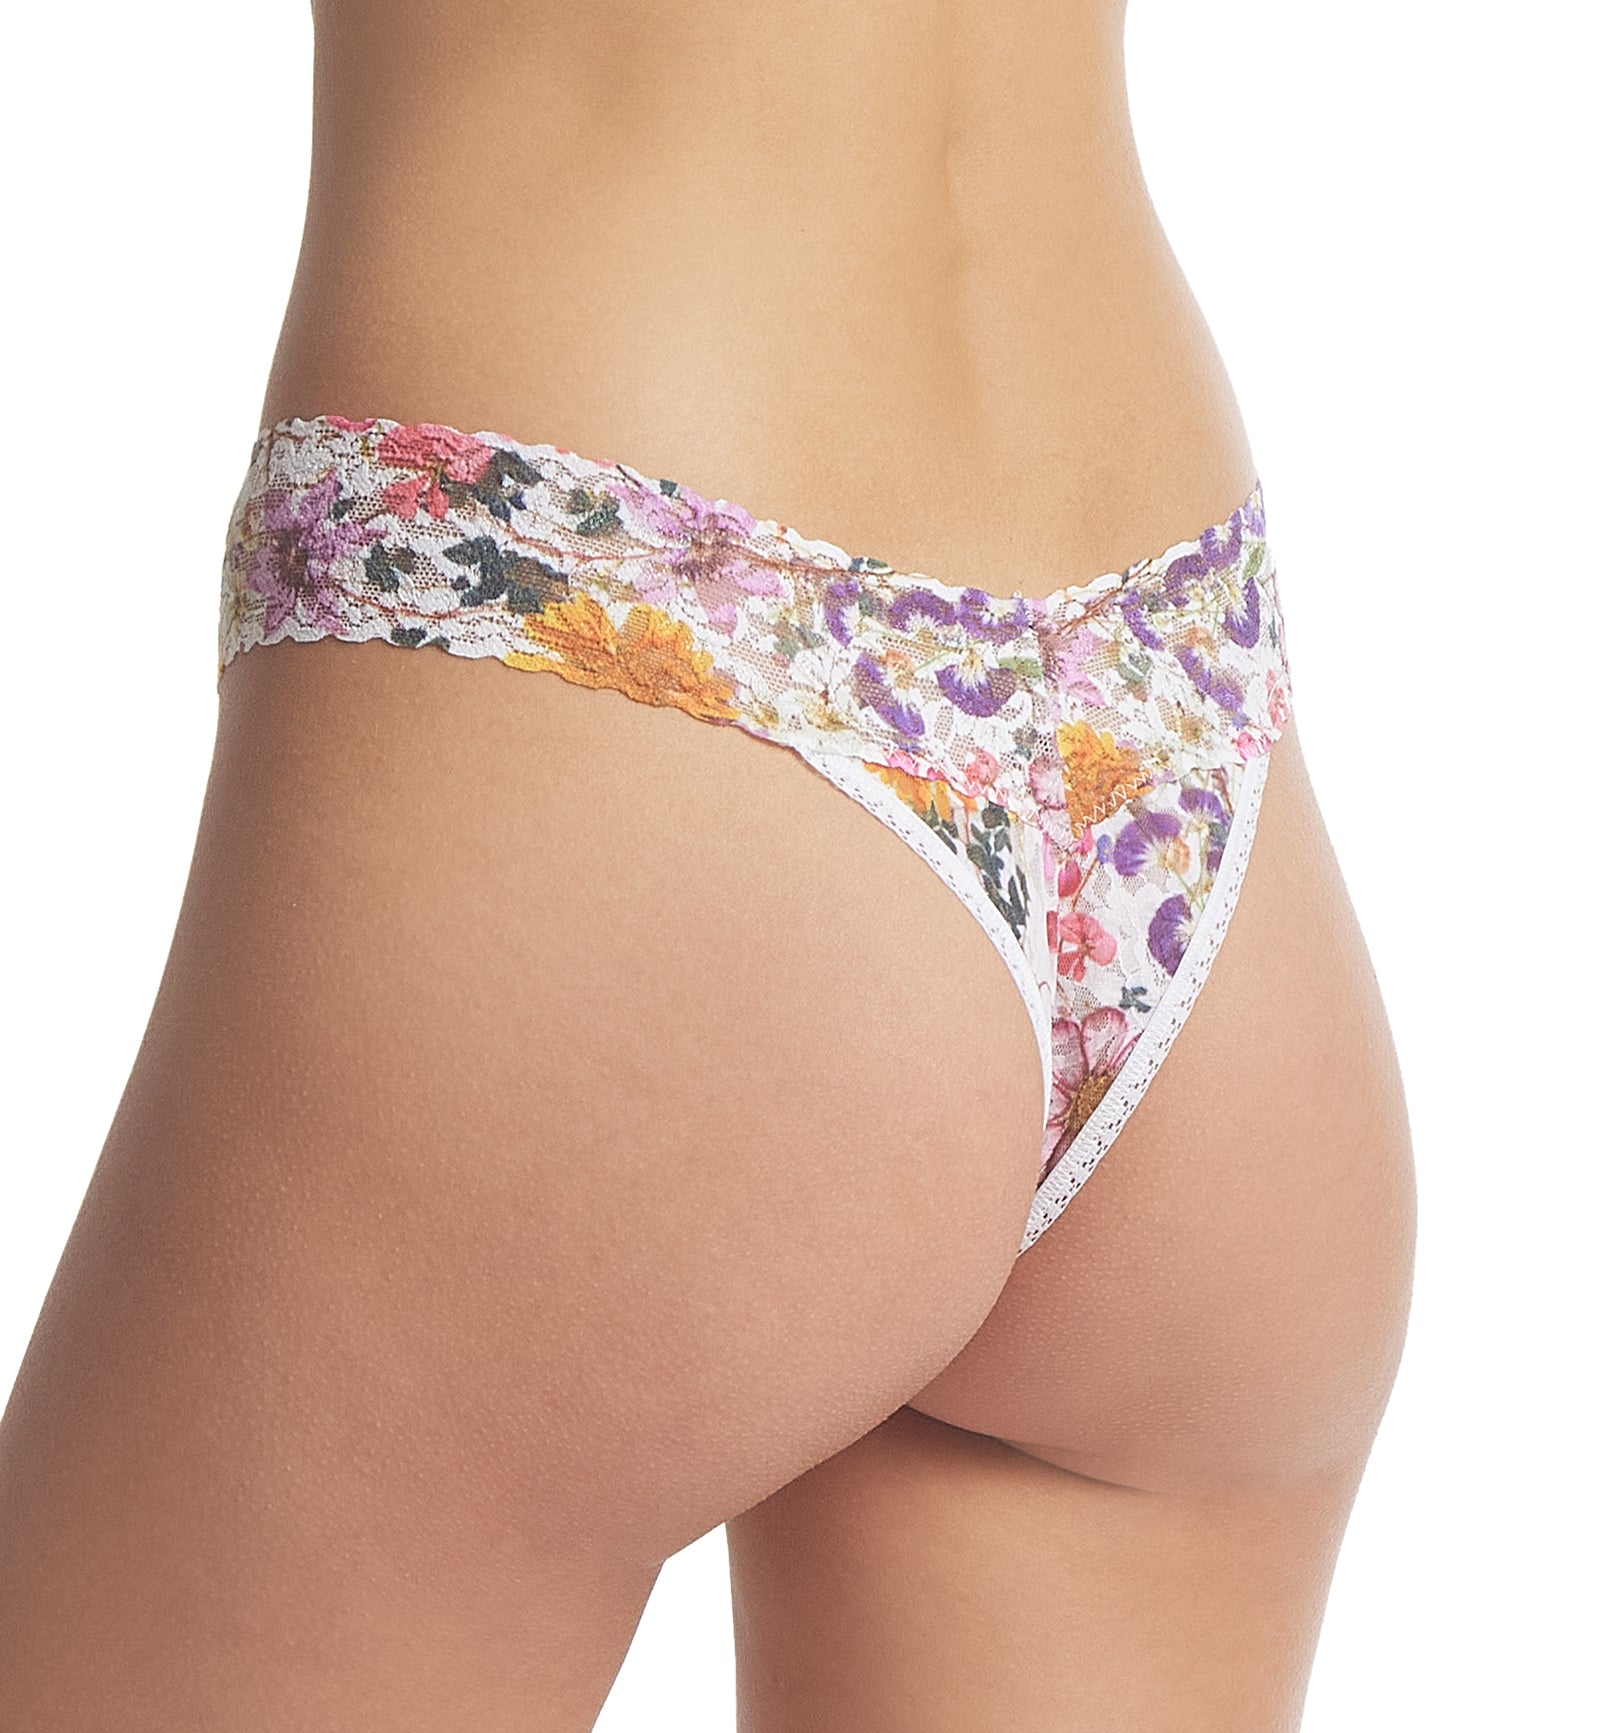 Hanky Panky Signature Lace Printed Original Rise Thong (PR4811P),Pressed Bouquet - Pressed Bouquet,One Size